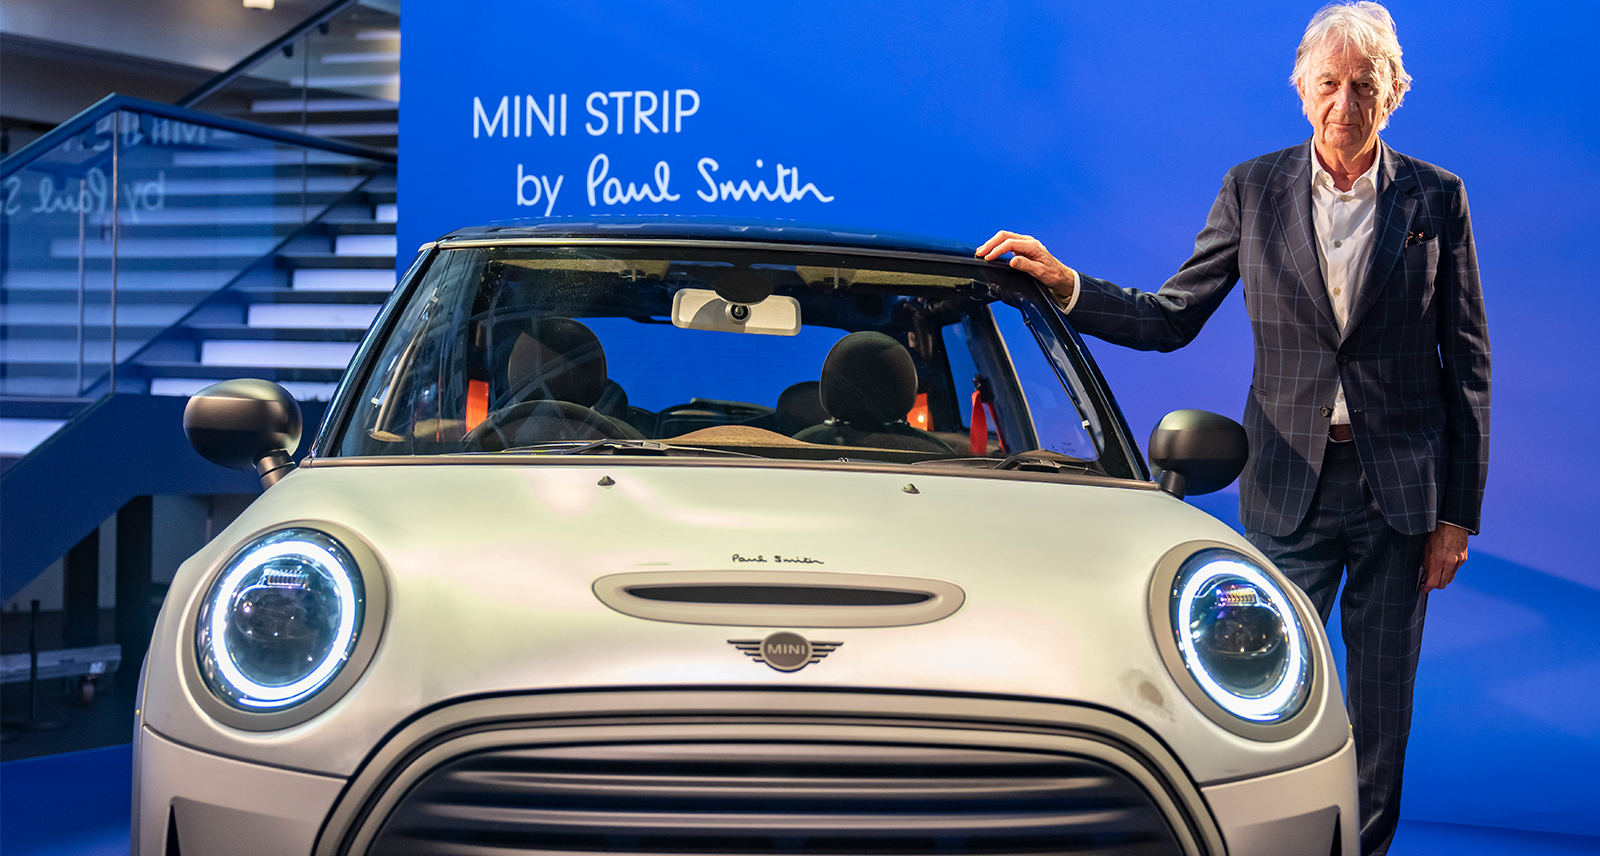 Paul Smith x Mini collab - interview feature